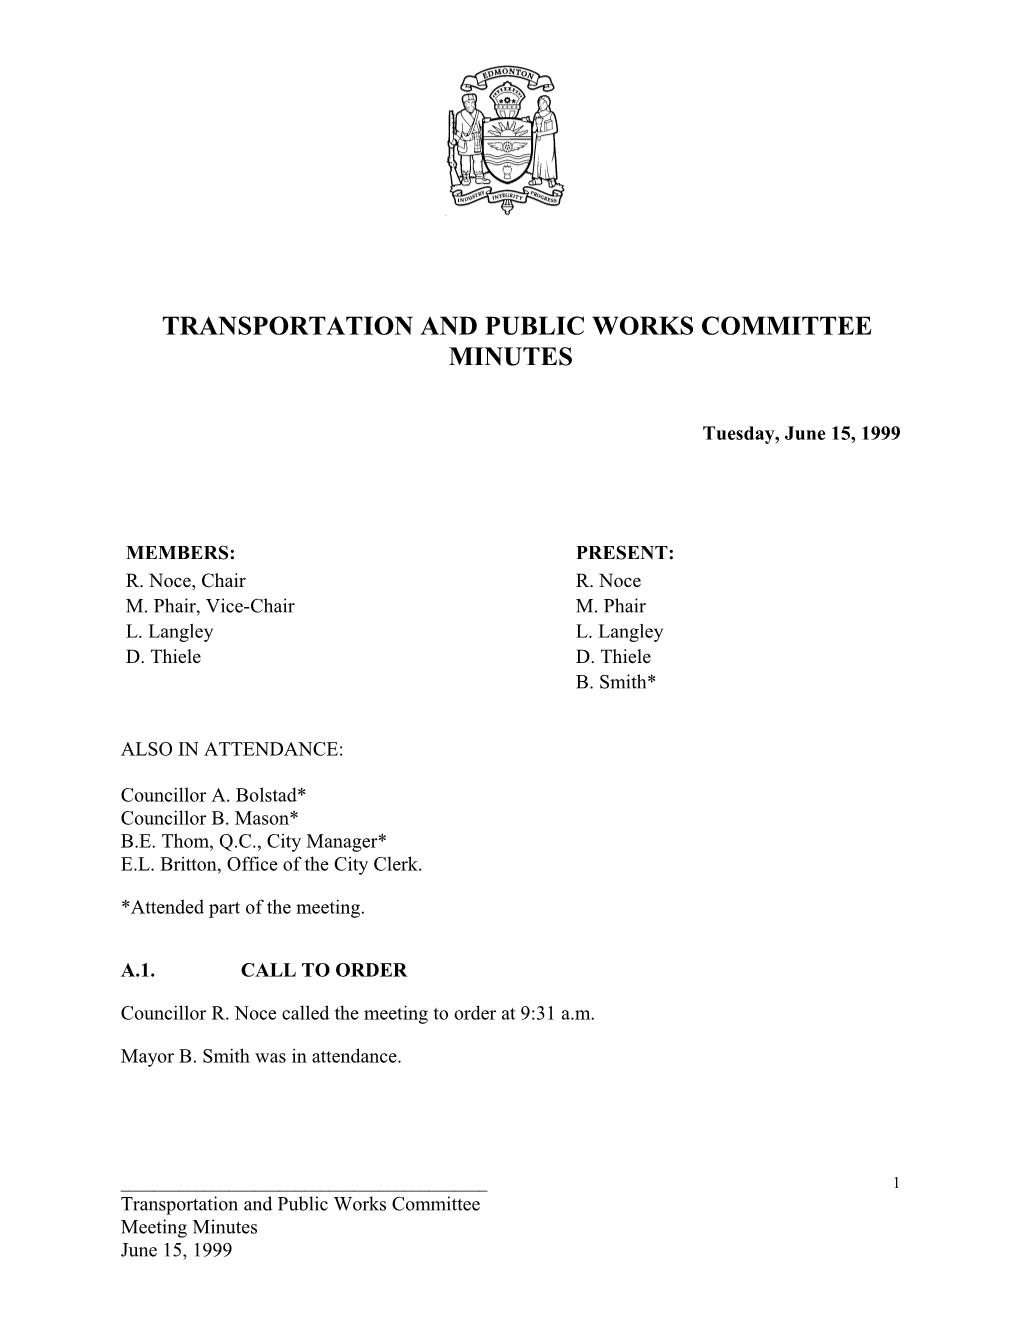 Minutes for Transportation and Public Works Committee June 15, 1999 Meeting